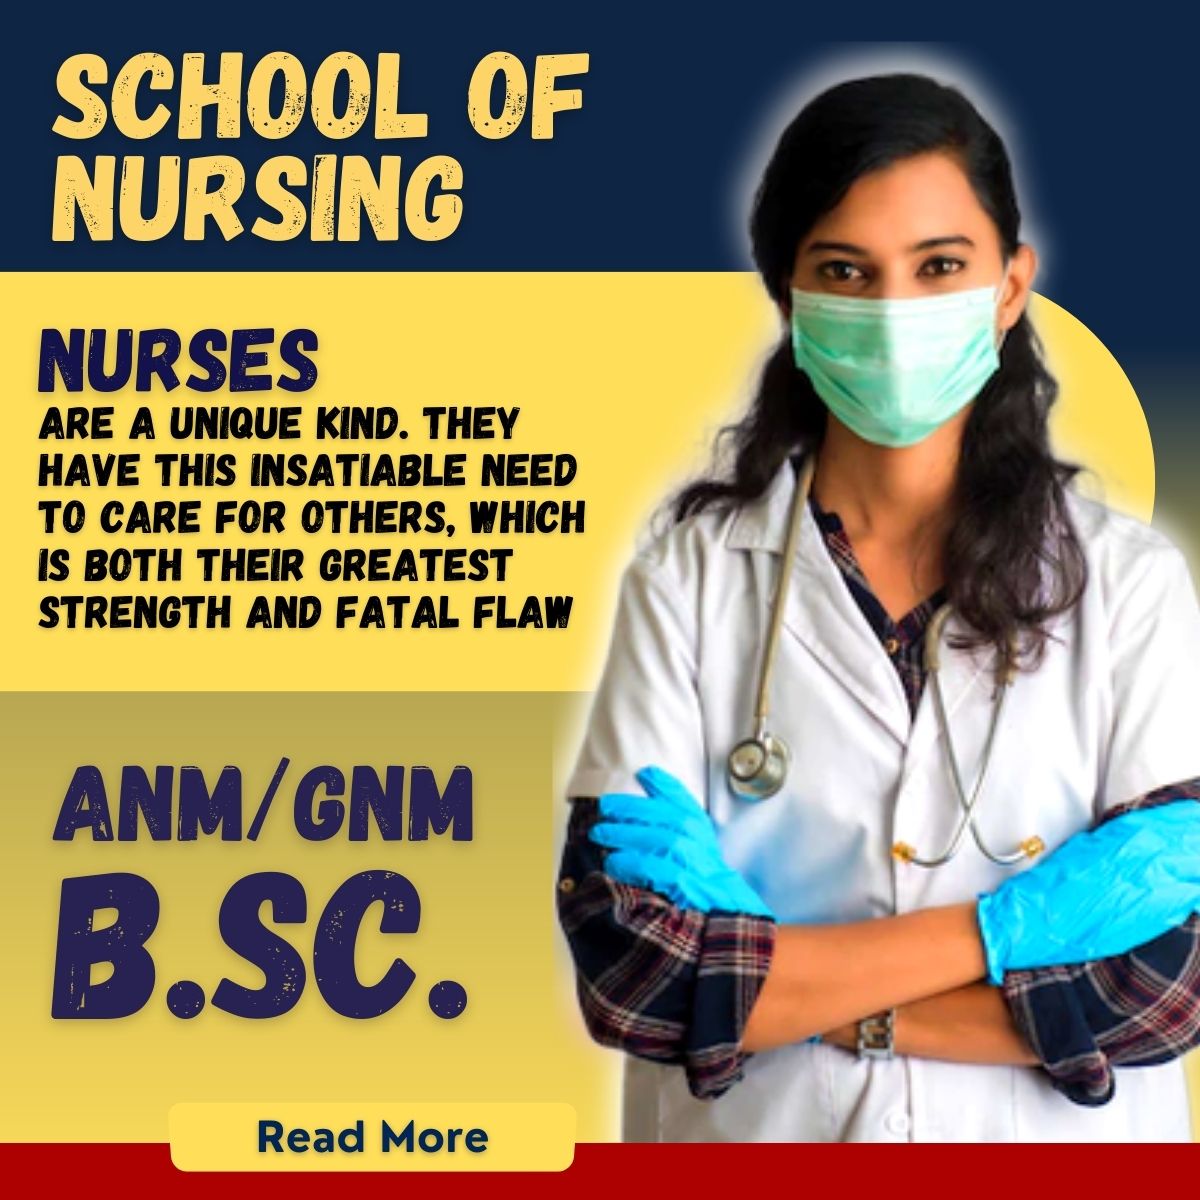 phd nursing colleges in up